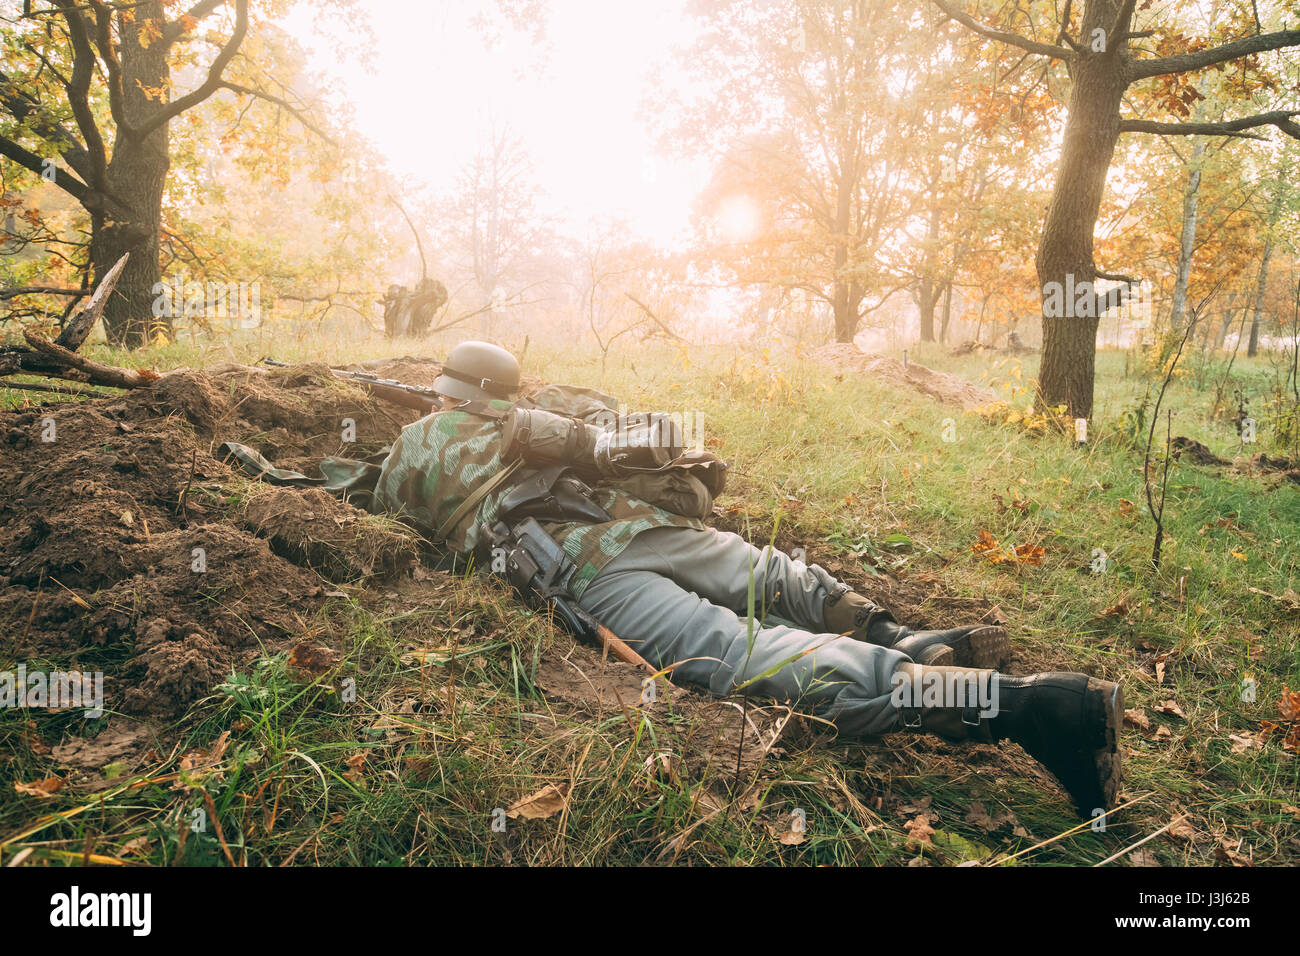 Unidentified Re-enactor Dressed As German Wehrmacht Infantry Soldier In World War II Hidden Sitting With Rifle Weapon In An Ambush In Trench In Autumn Stock Photo